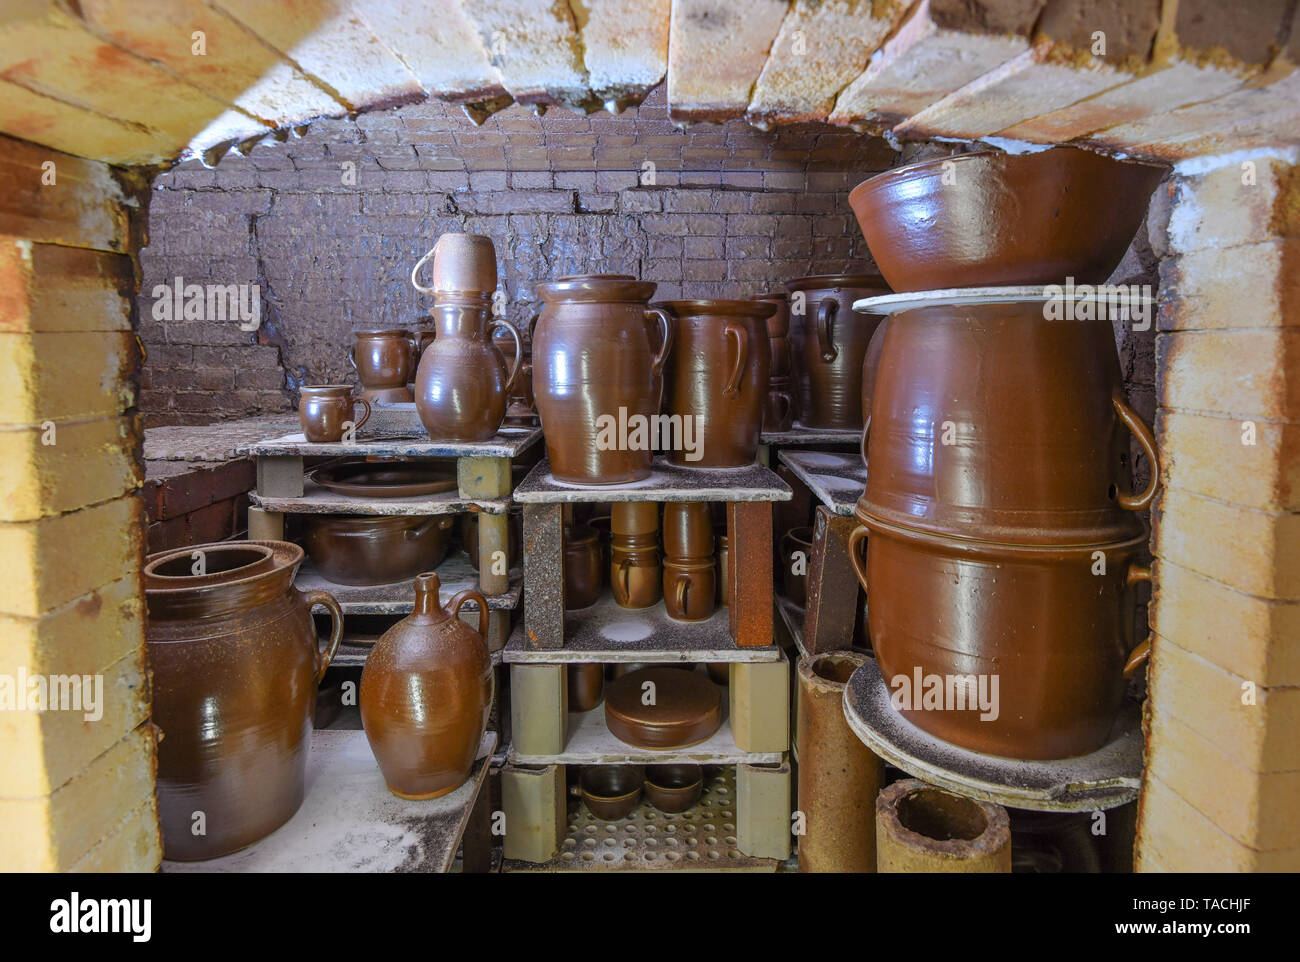 24 May 2019, Brandenburg, Groß Neuendorf: Jugs, cups and other vessels stand in the oven of the potter Manfred Dannegger. Since 1997 the potter has been producing this clay glazed stoneware in the tradition of Bunzlau brownware. The dishes are fired in the oven at about 1300 degrees Celsius for about 20 hours. The oven must then cool for four days. This weekend (25.05./26.05.) the 12th pottery market will take place in Groß Neuendorf. Then 22 potters from near and far present themselves directly at the dike of the German-Polish border river Oder. Photo: Patrick Pleul/dpa-Zentralbild/ZB Stock Photo